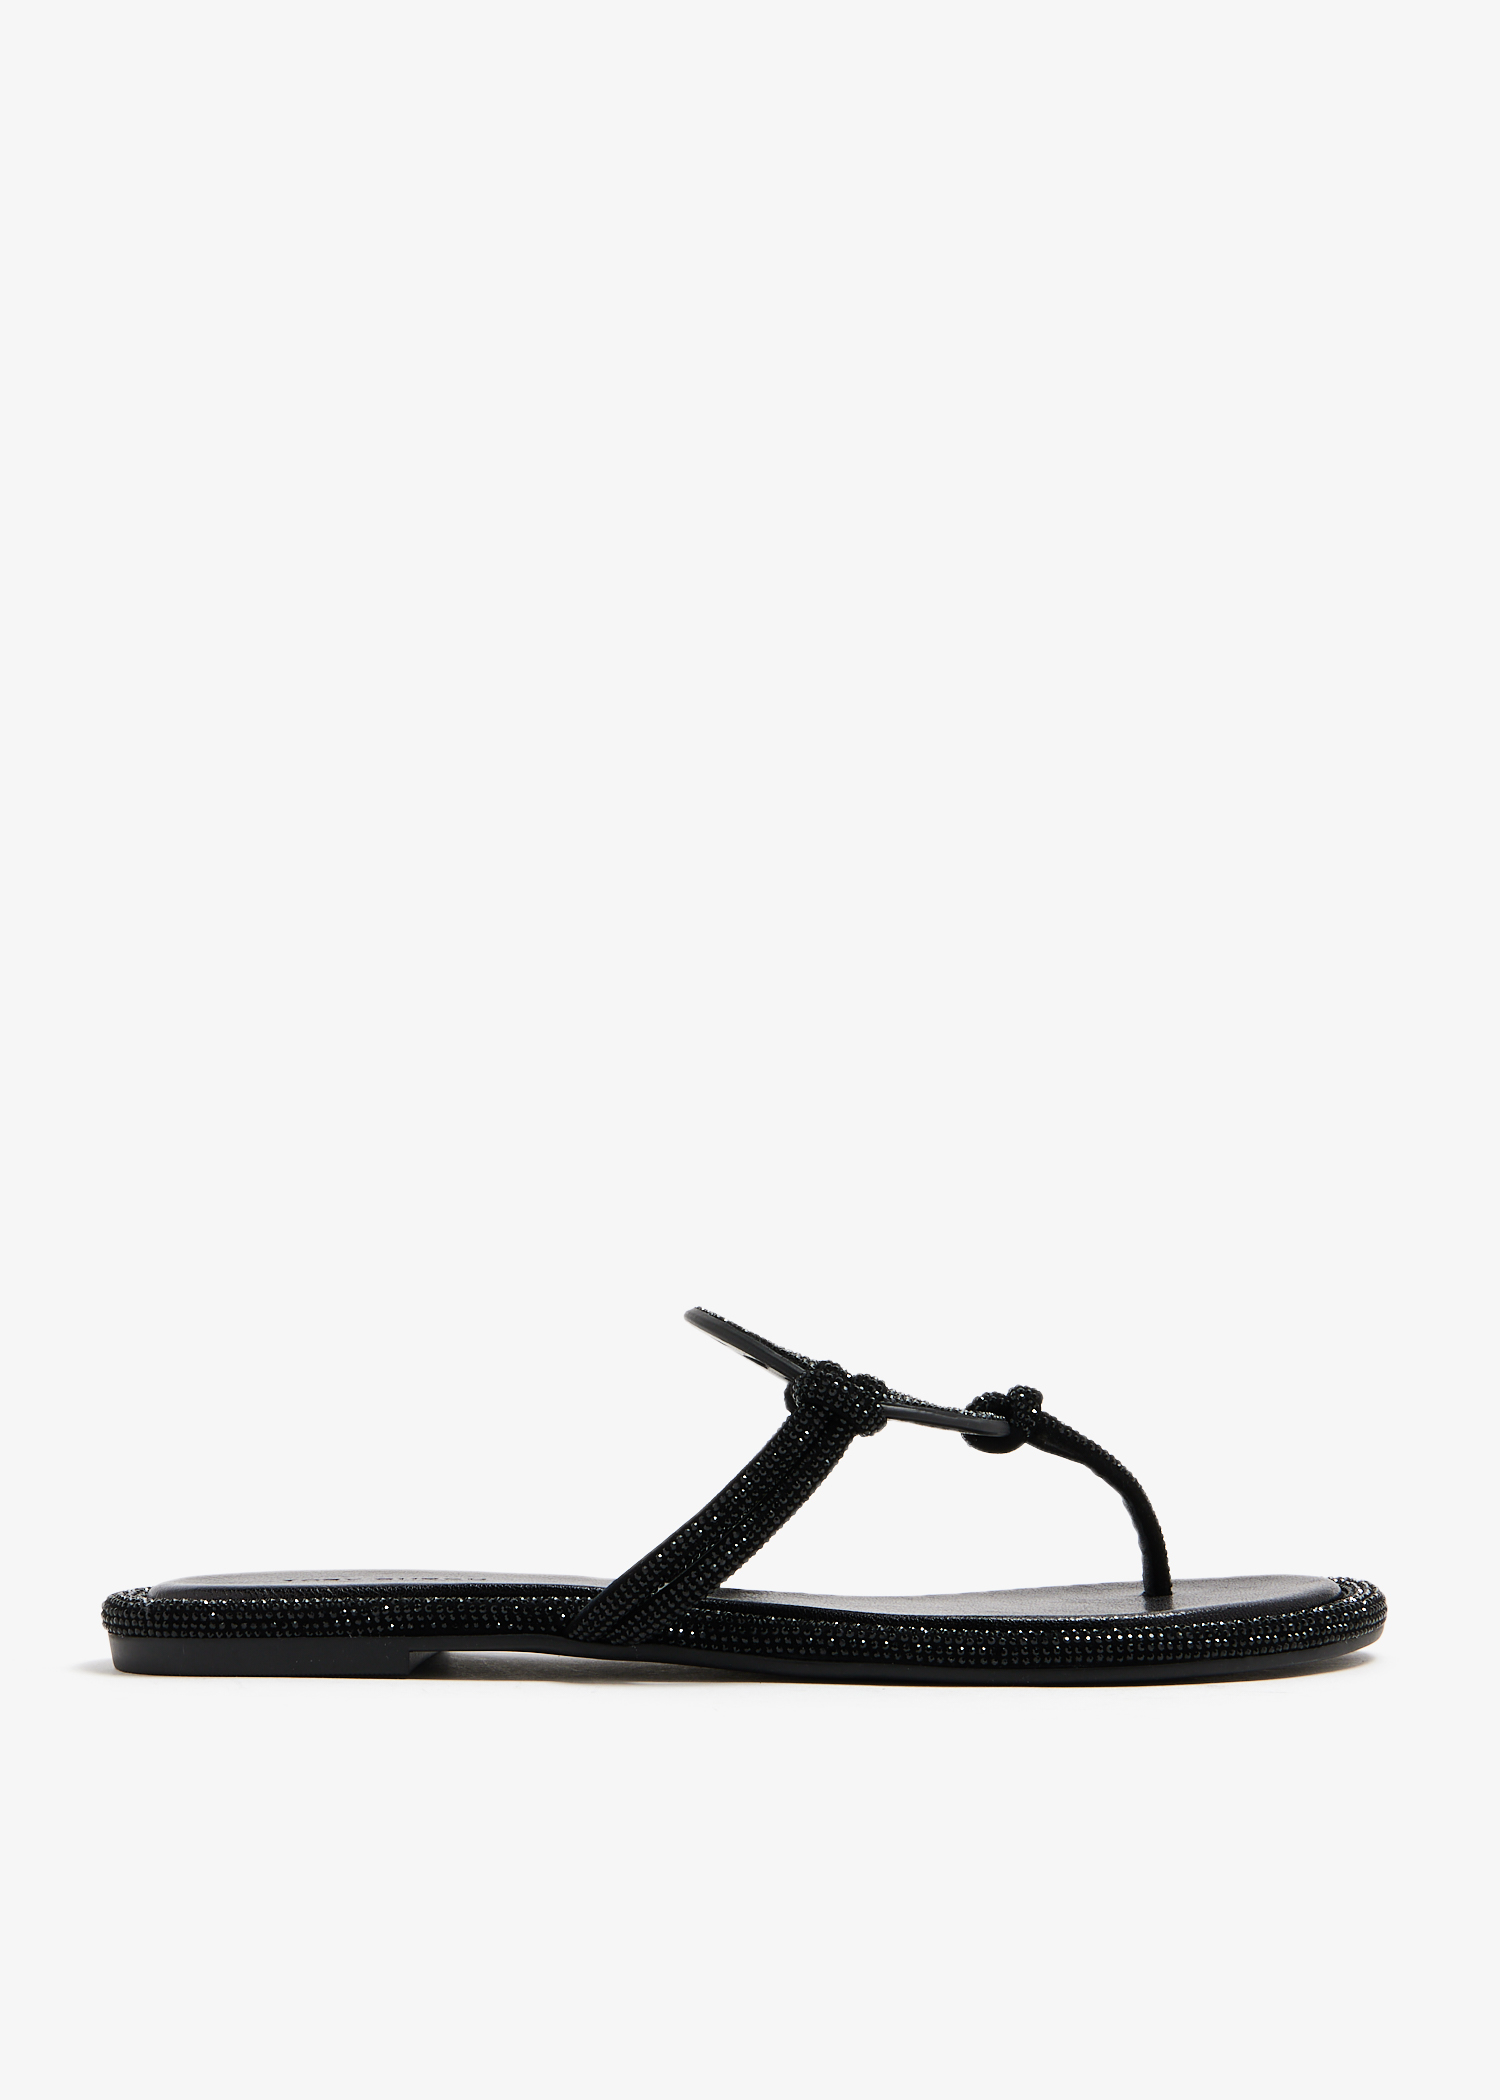 TORY BURCH CLAIRE FLAT THONG SANDAL IN PERFECT BLACK